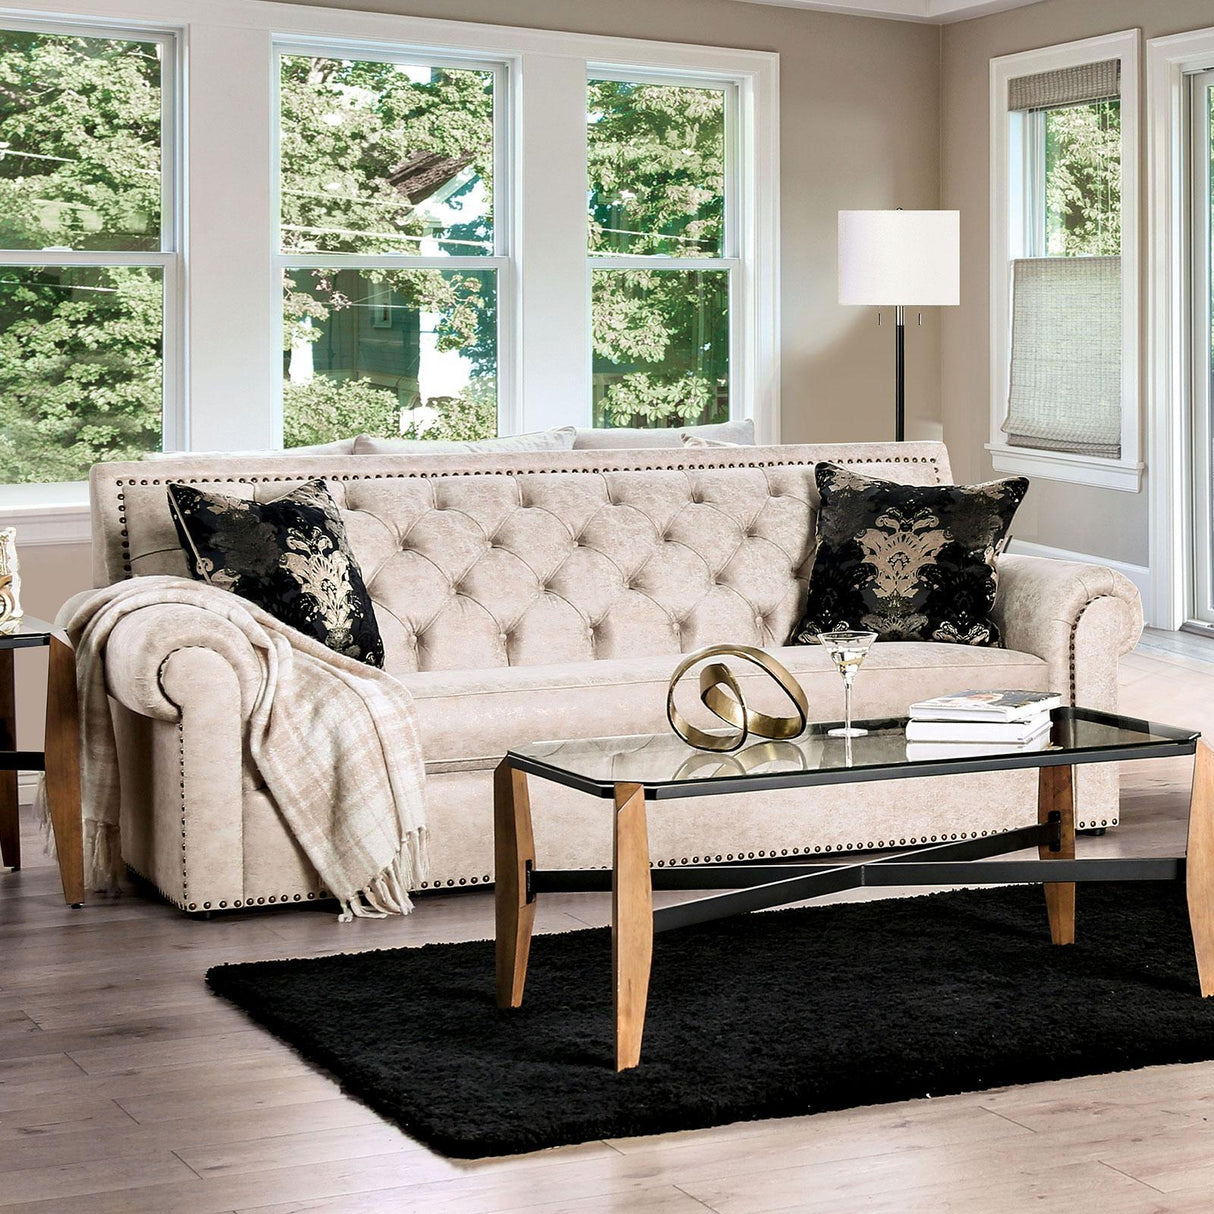 Parshall Traditional Sofa and Loveseat by Furniture of America